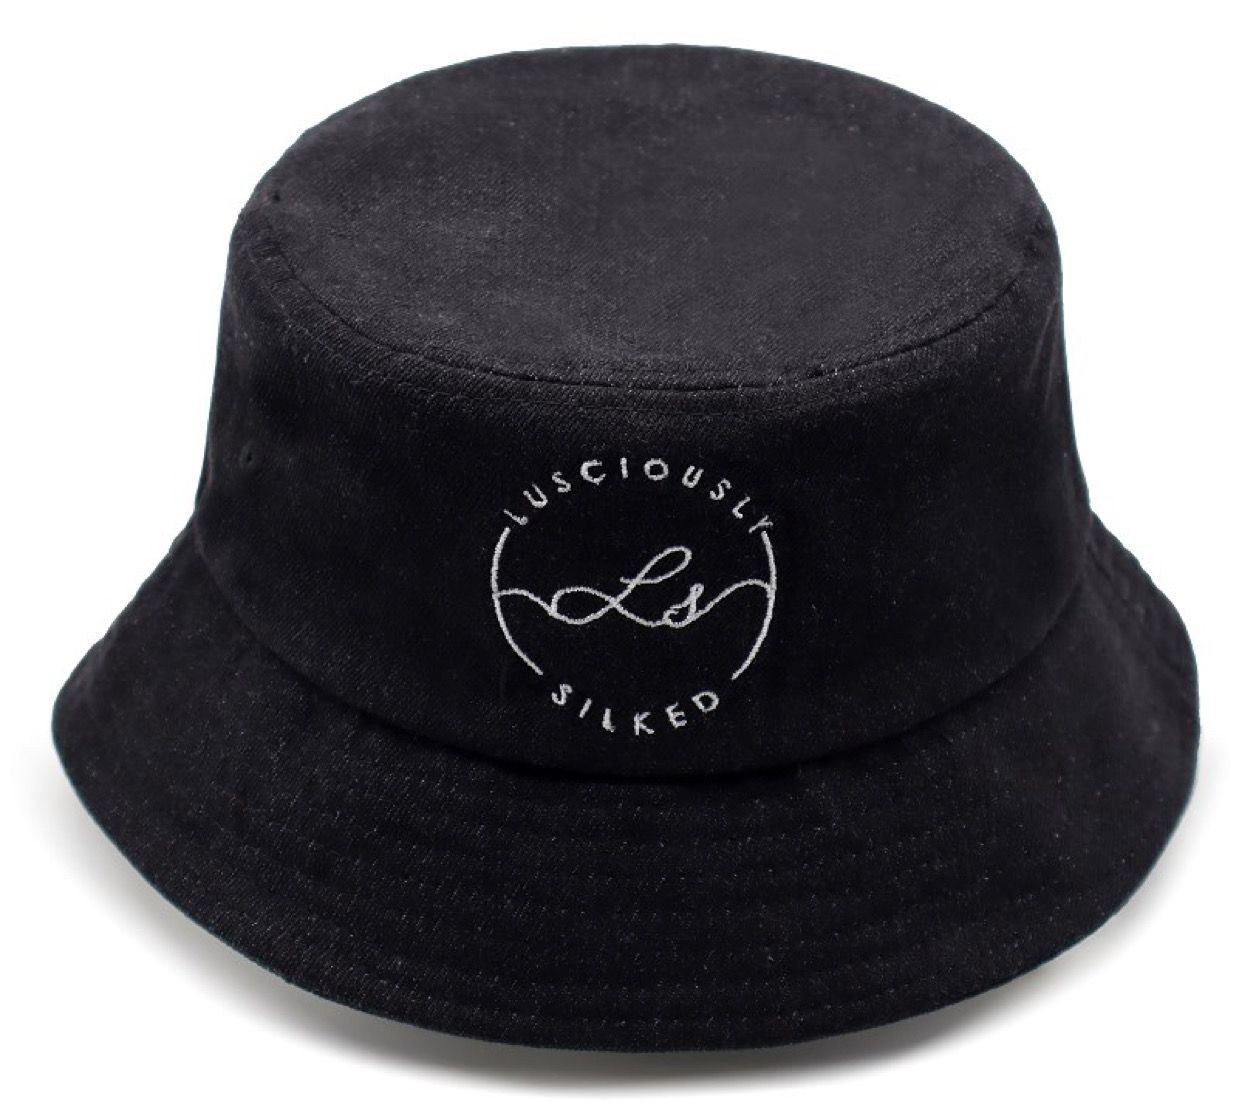 Satin Lined Bucket Hats – Lusciously Silked